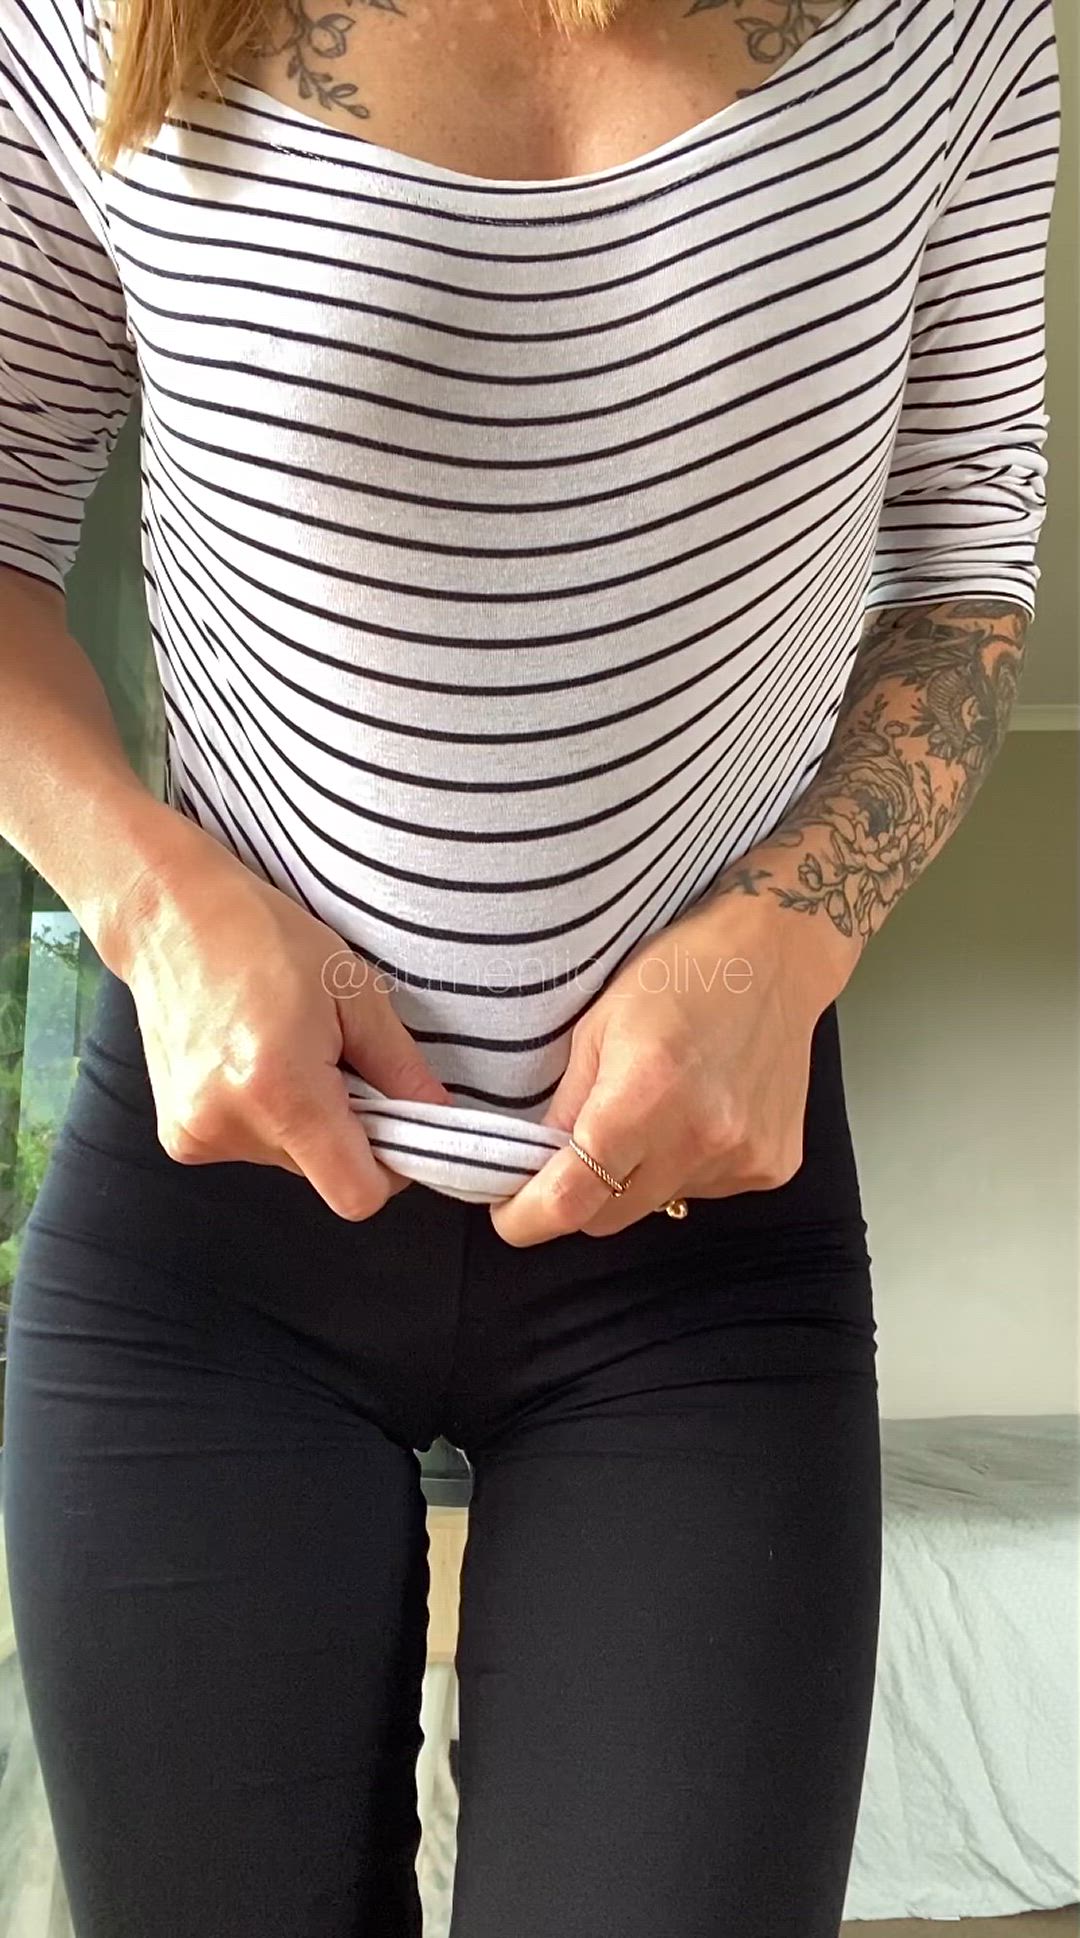 Ass porn video with onlyfans model o0live <strong>@authentic_olive</strong>